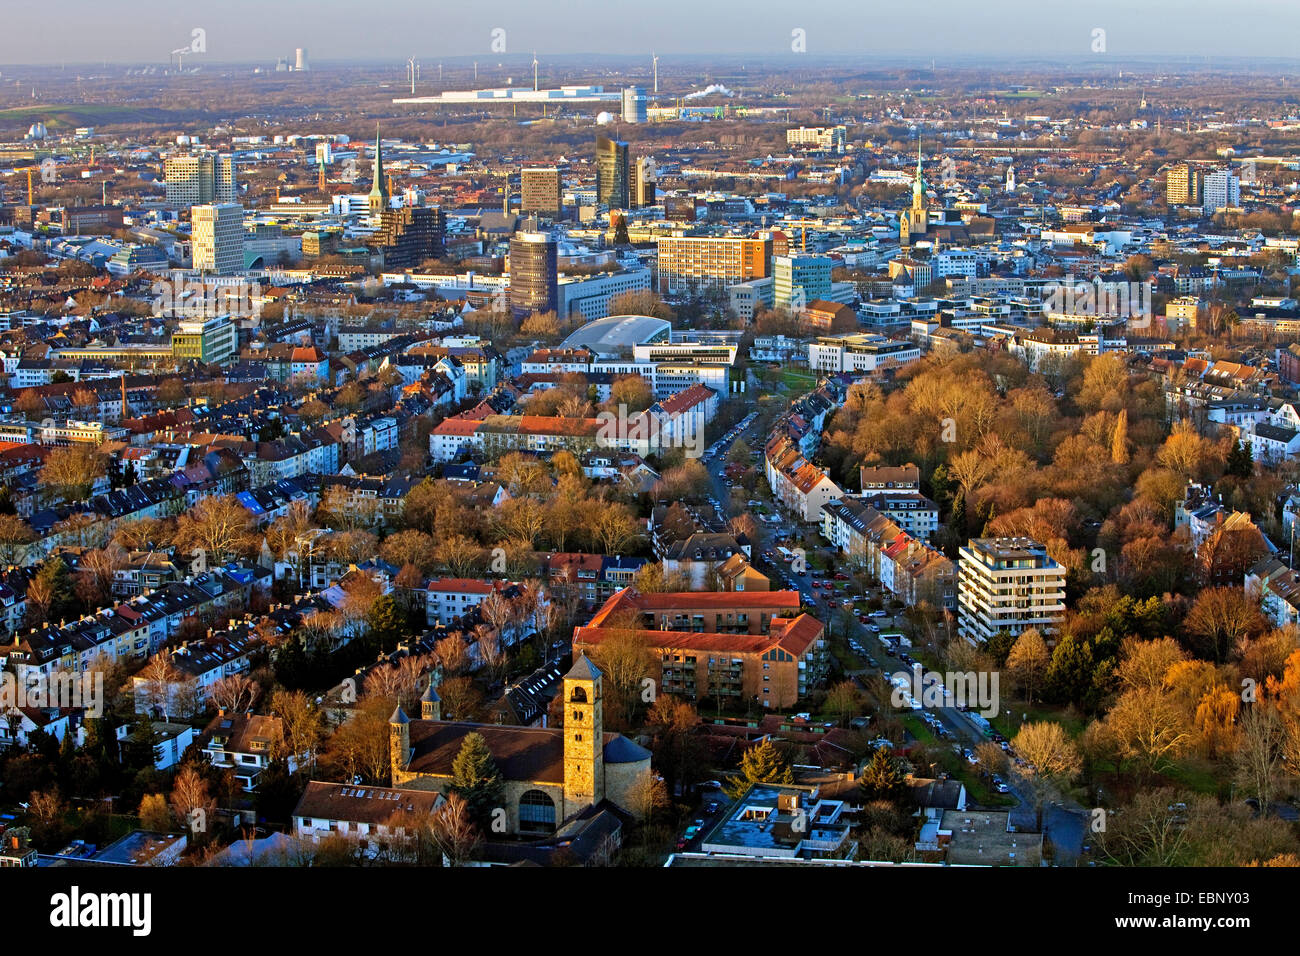 view from television tower Florianturm to the city, Germany, North Rhine-Westphalia, Ruhr Area, Dortmund Stock Photo